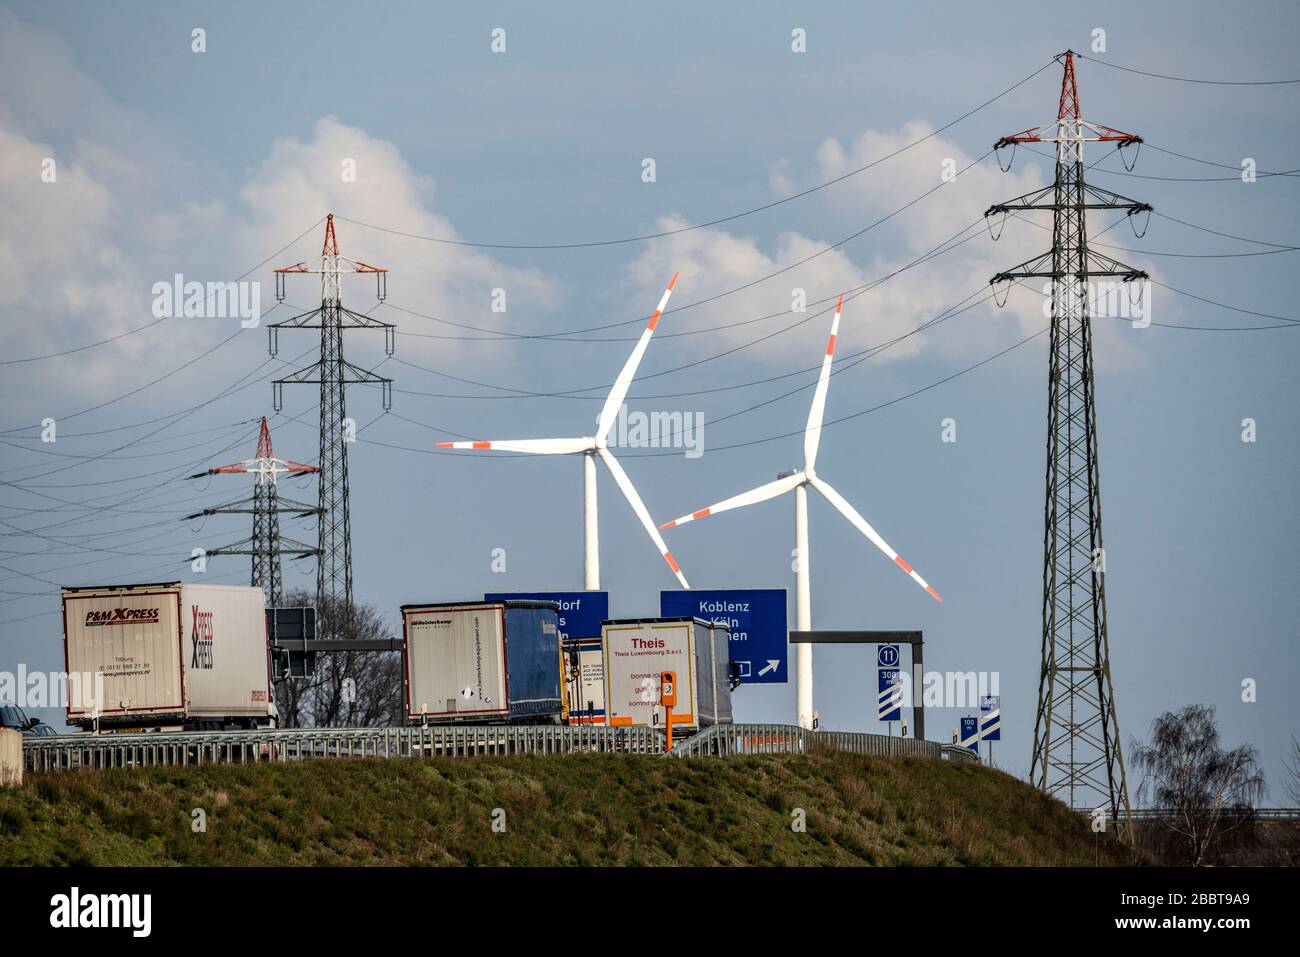 A 46 motorway, Holz motorway junction, access to A44 and A61, wind turbines, high-voltage pylons, near JŸchen, Germany Stock Photo